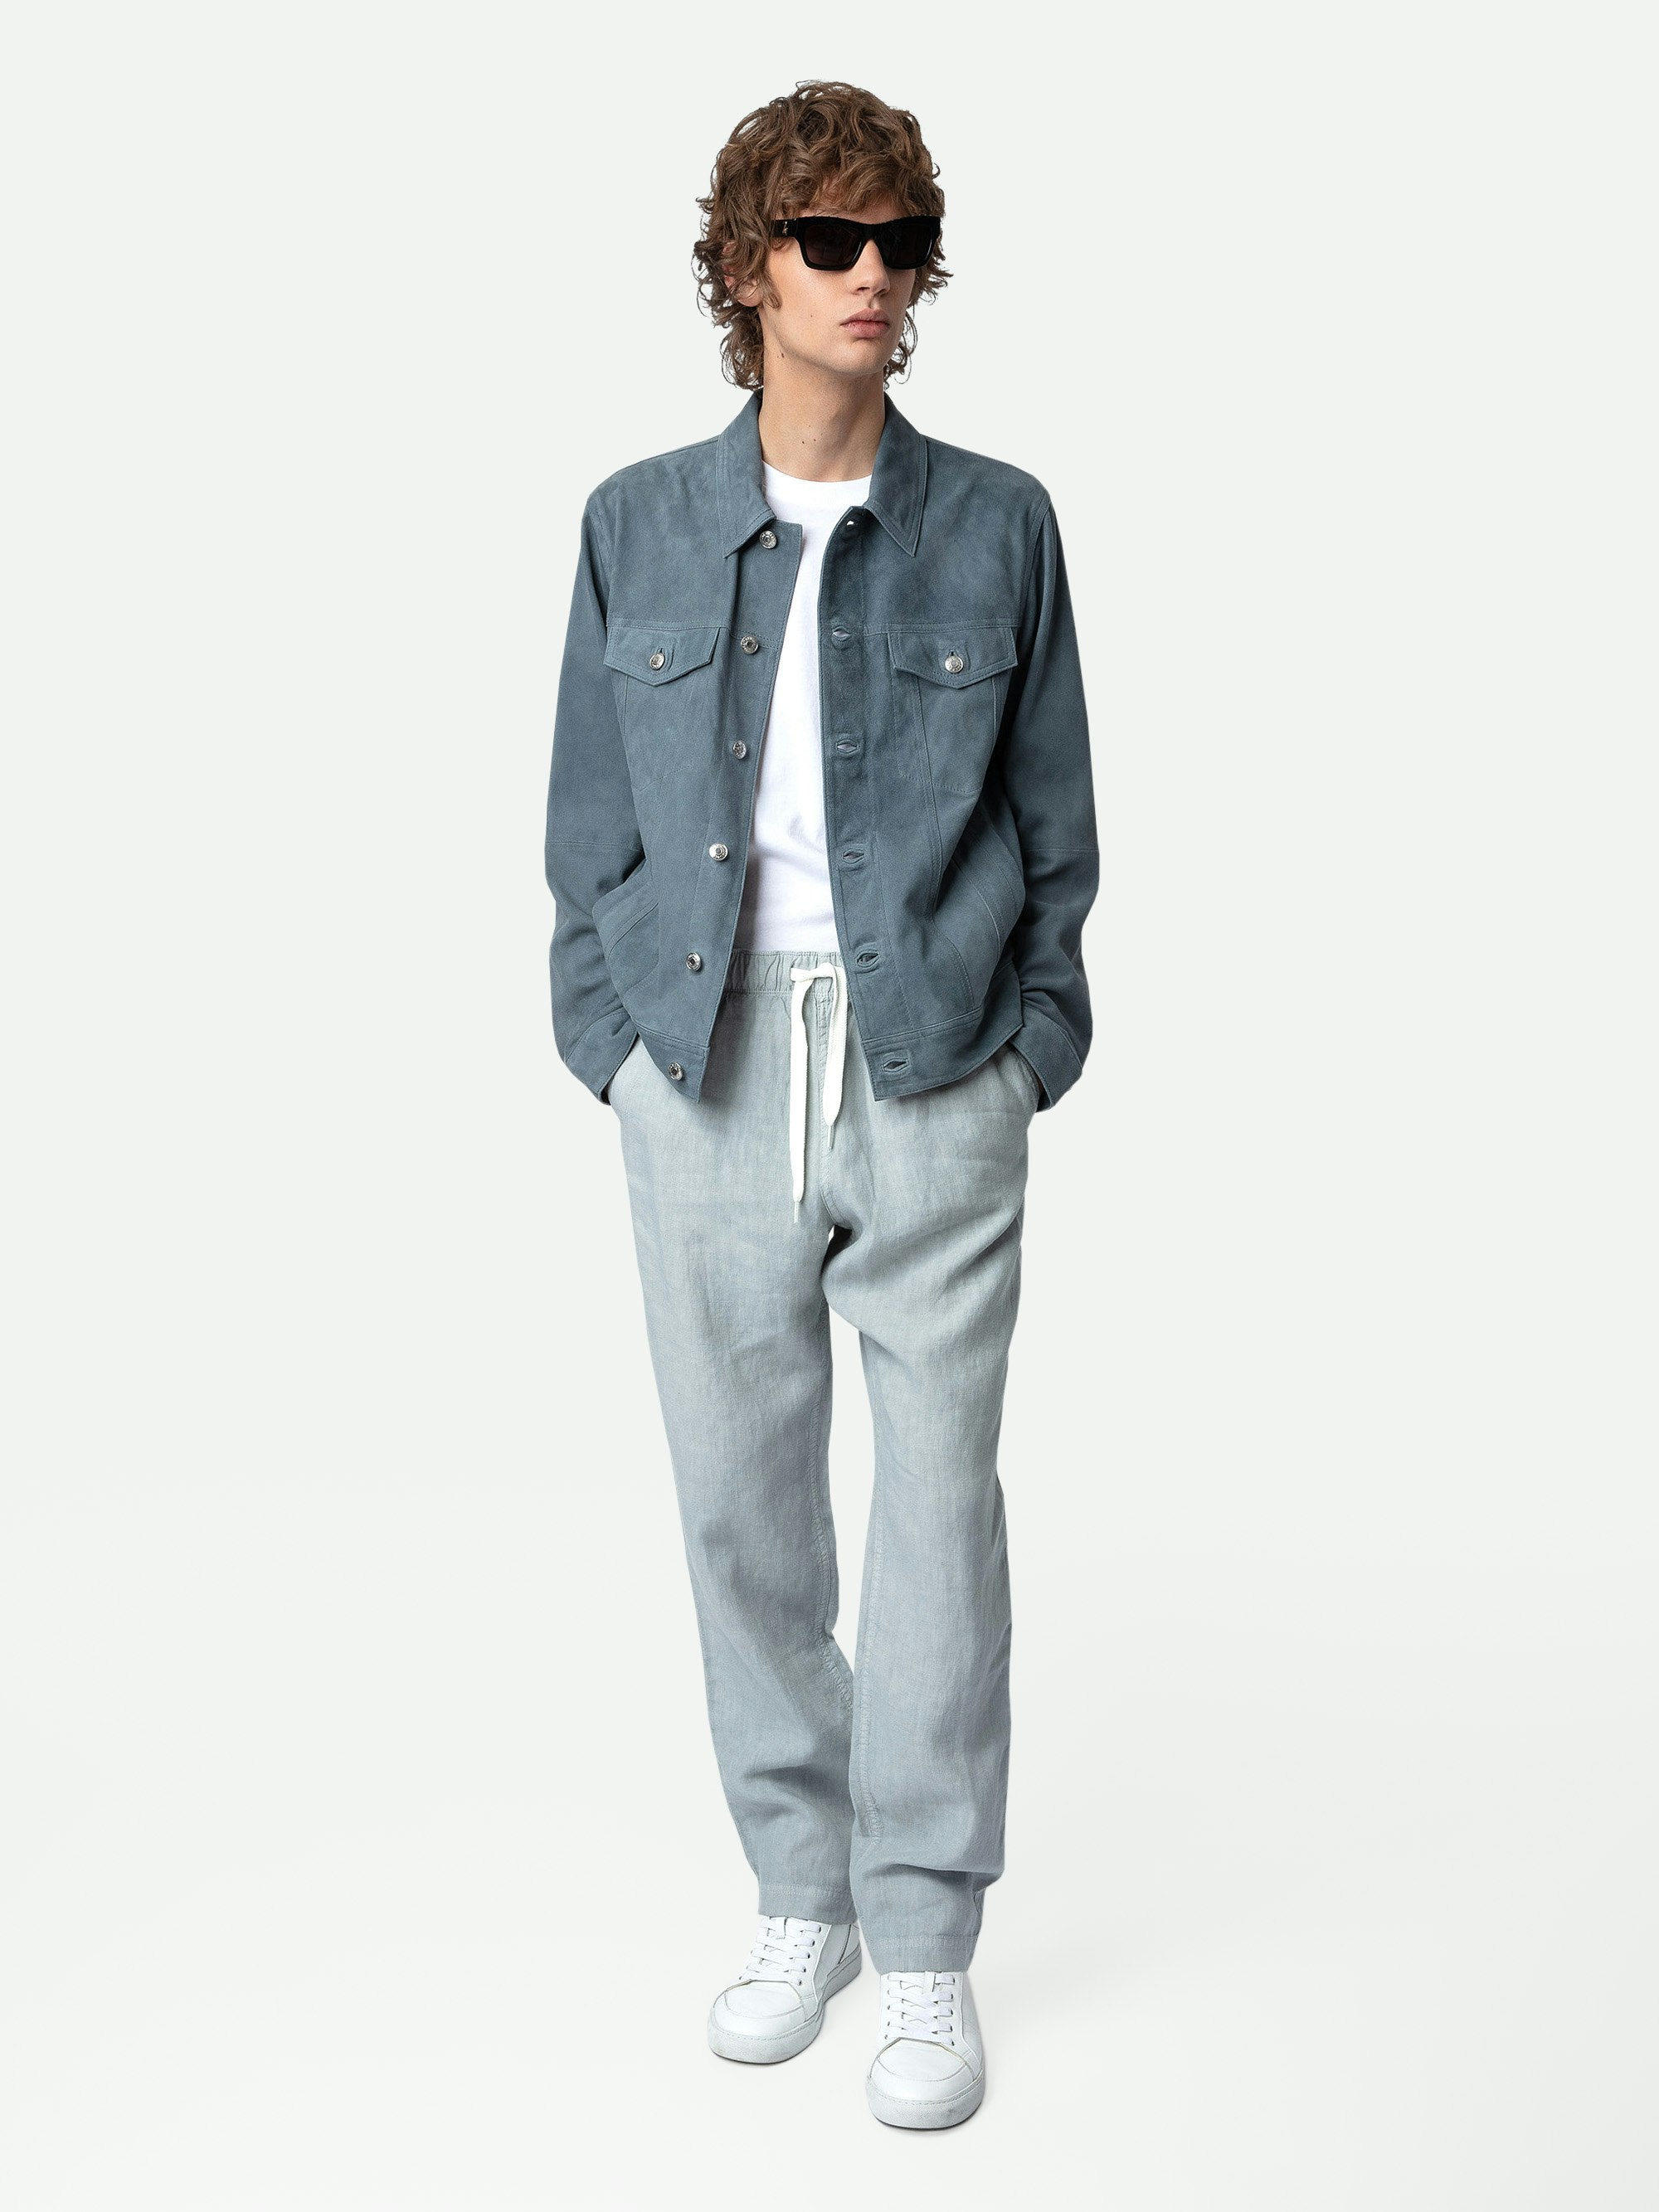 Pixel Linen Trousers - Sky blue washed linen trousers with pockets and drawstring ties.